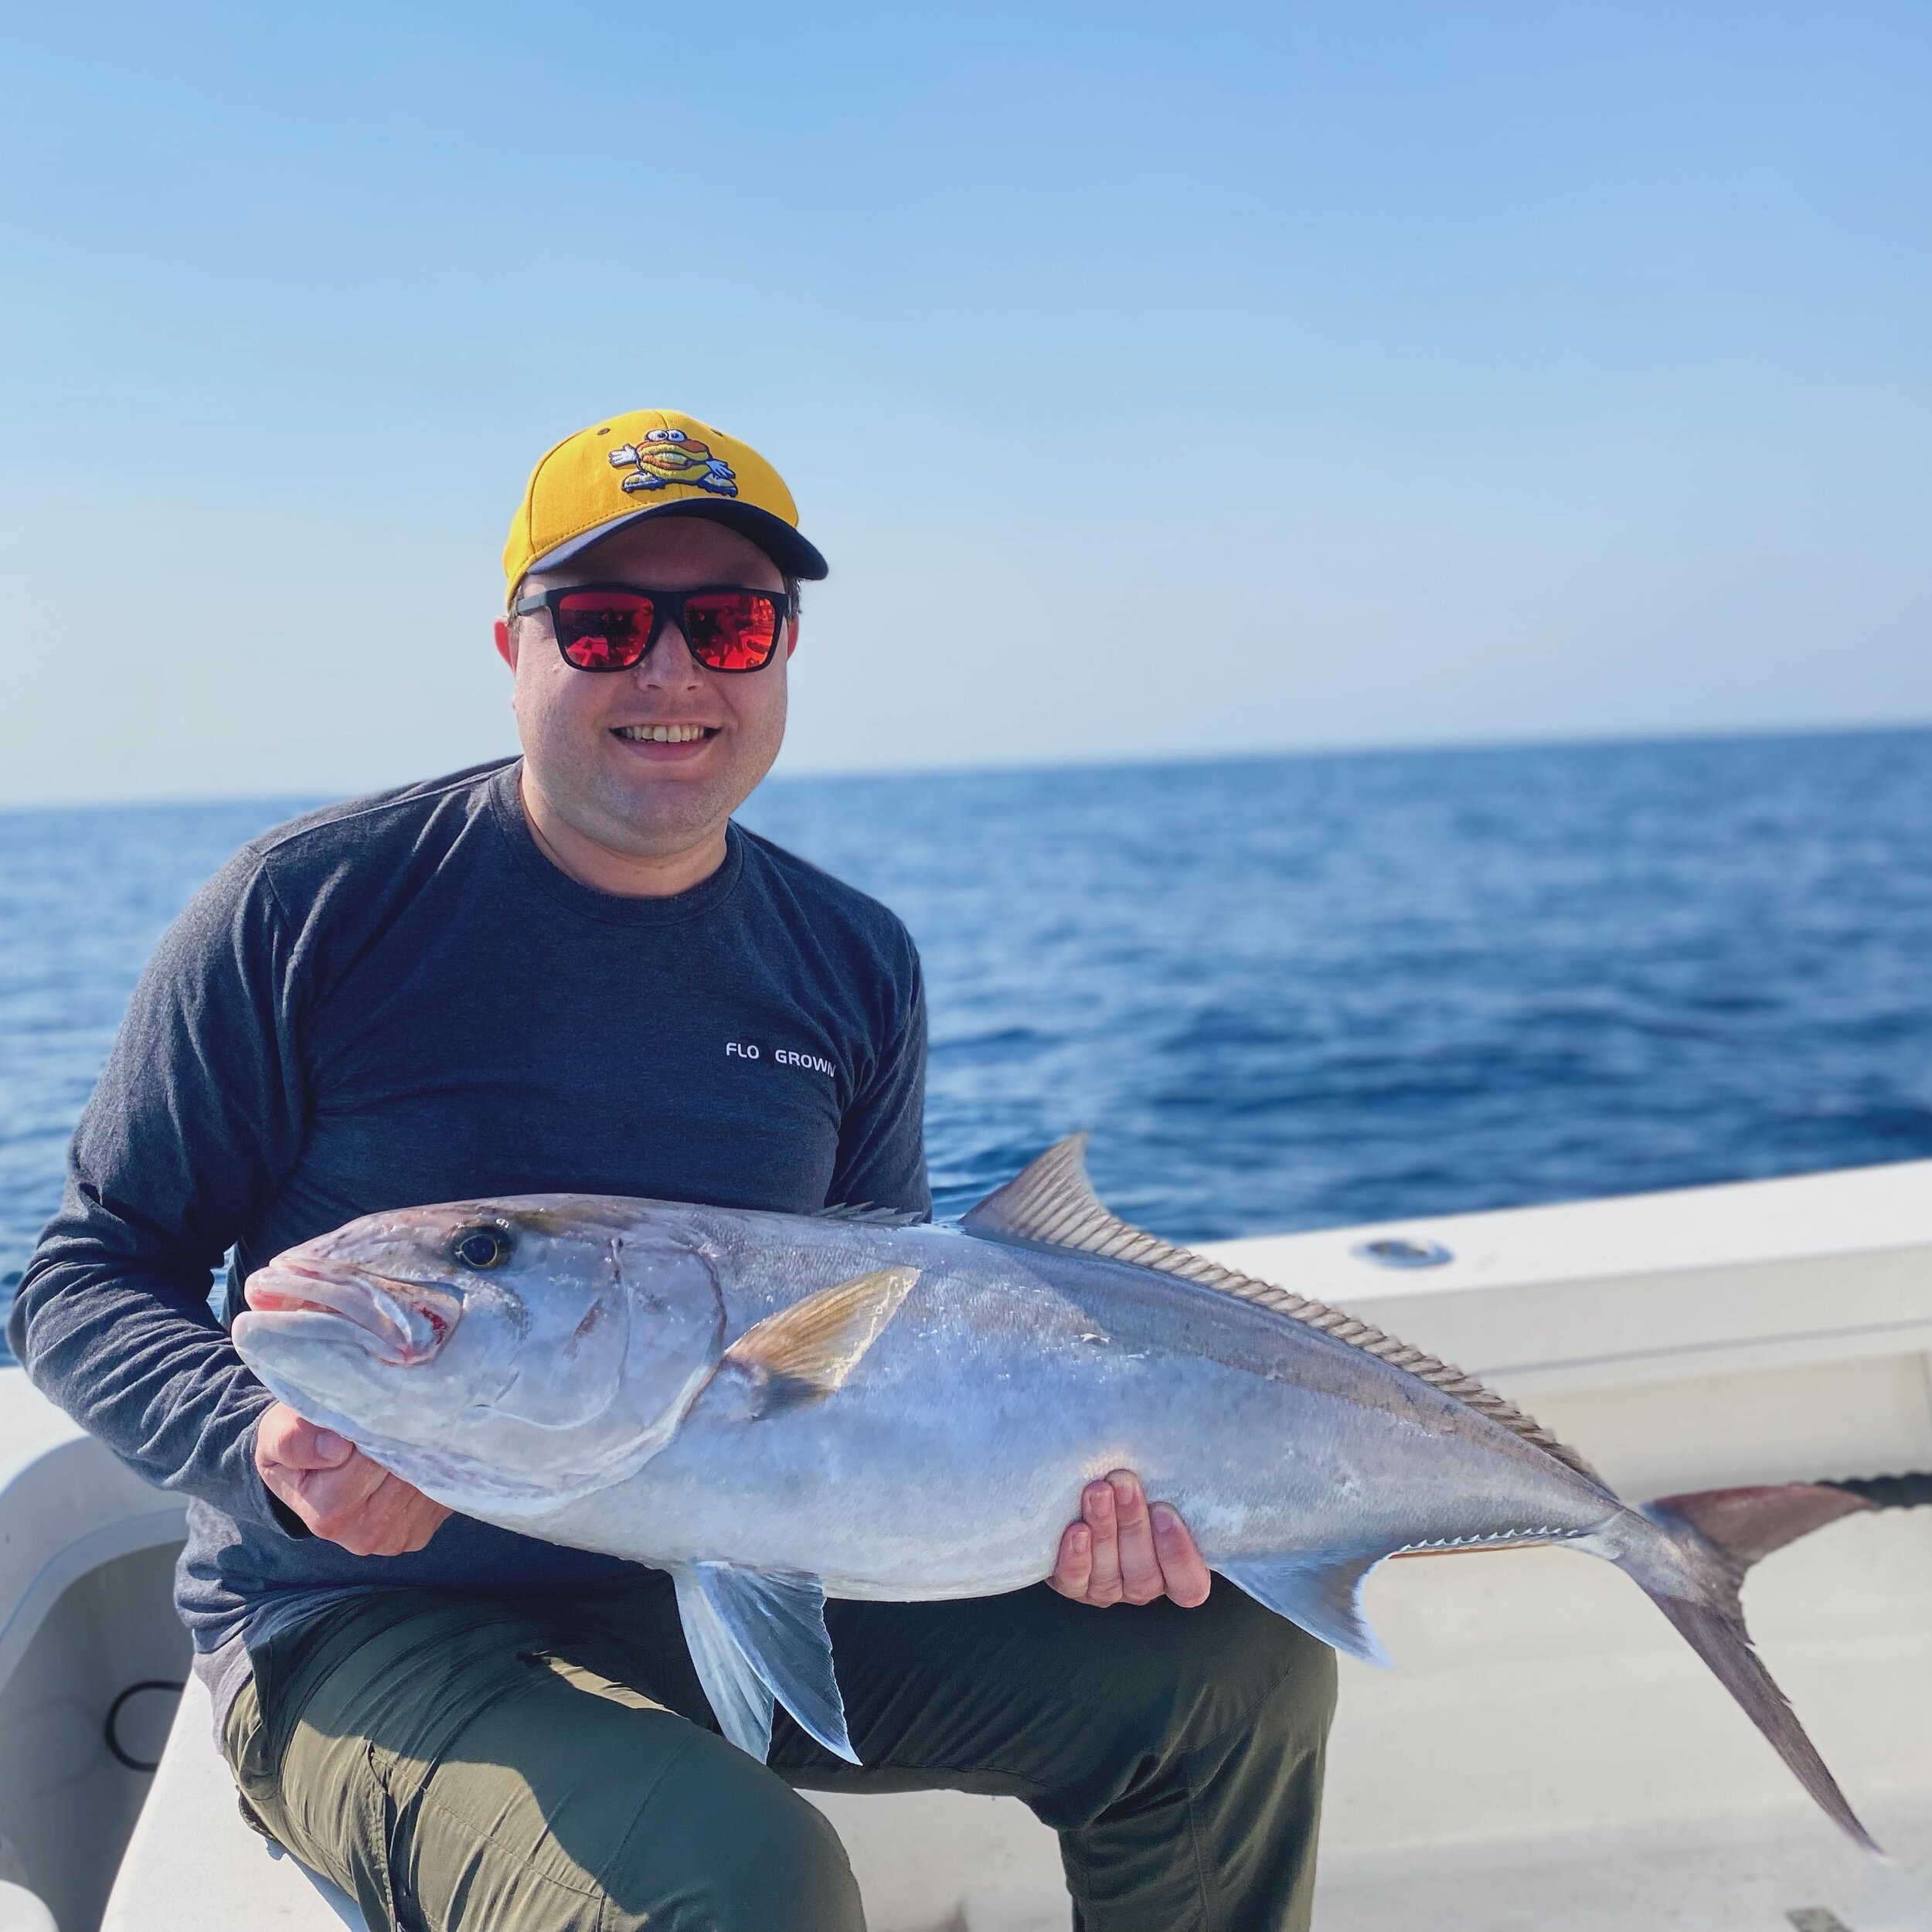 Colby with the first Amberjack of the year. Glad to see these guys showing back up! 
-
-
-
#amberjack #deepseafishing #reefdonkey #catchandrelease #offshorefishing #bowedup